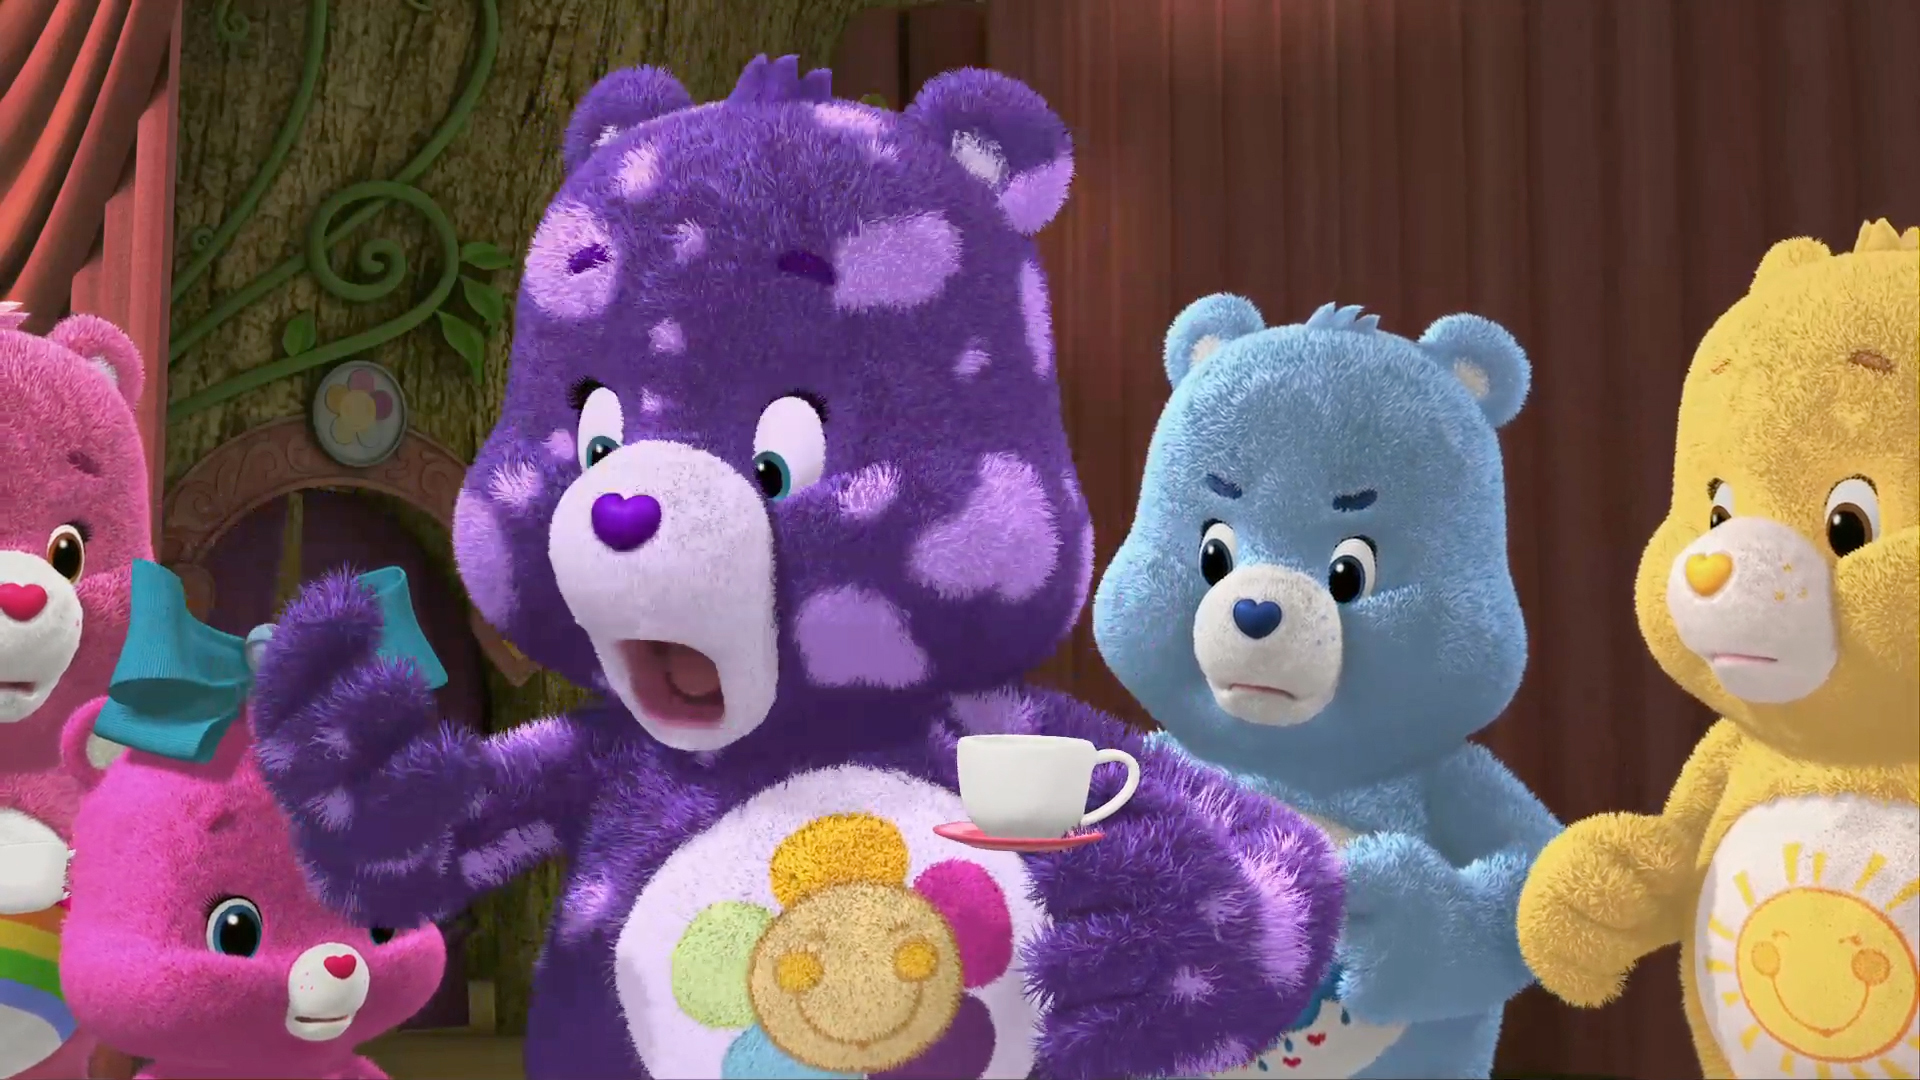 Care Bears: Welcome to Care-a-Lot